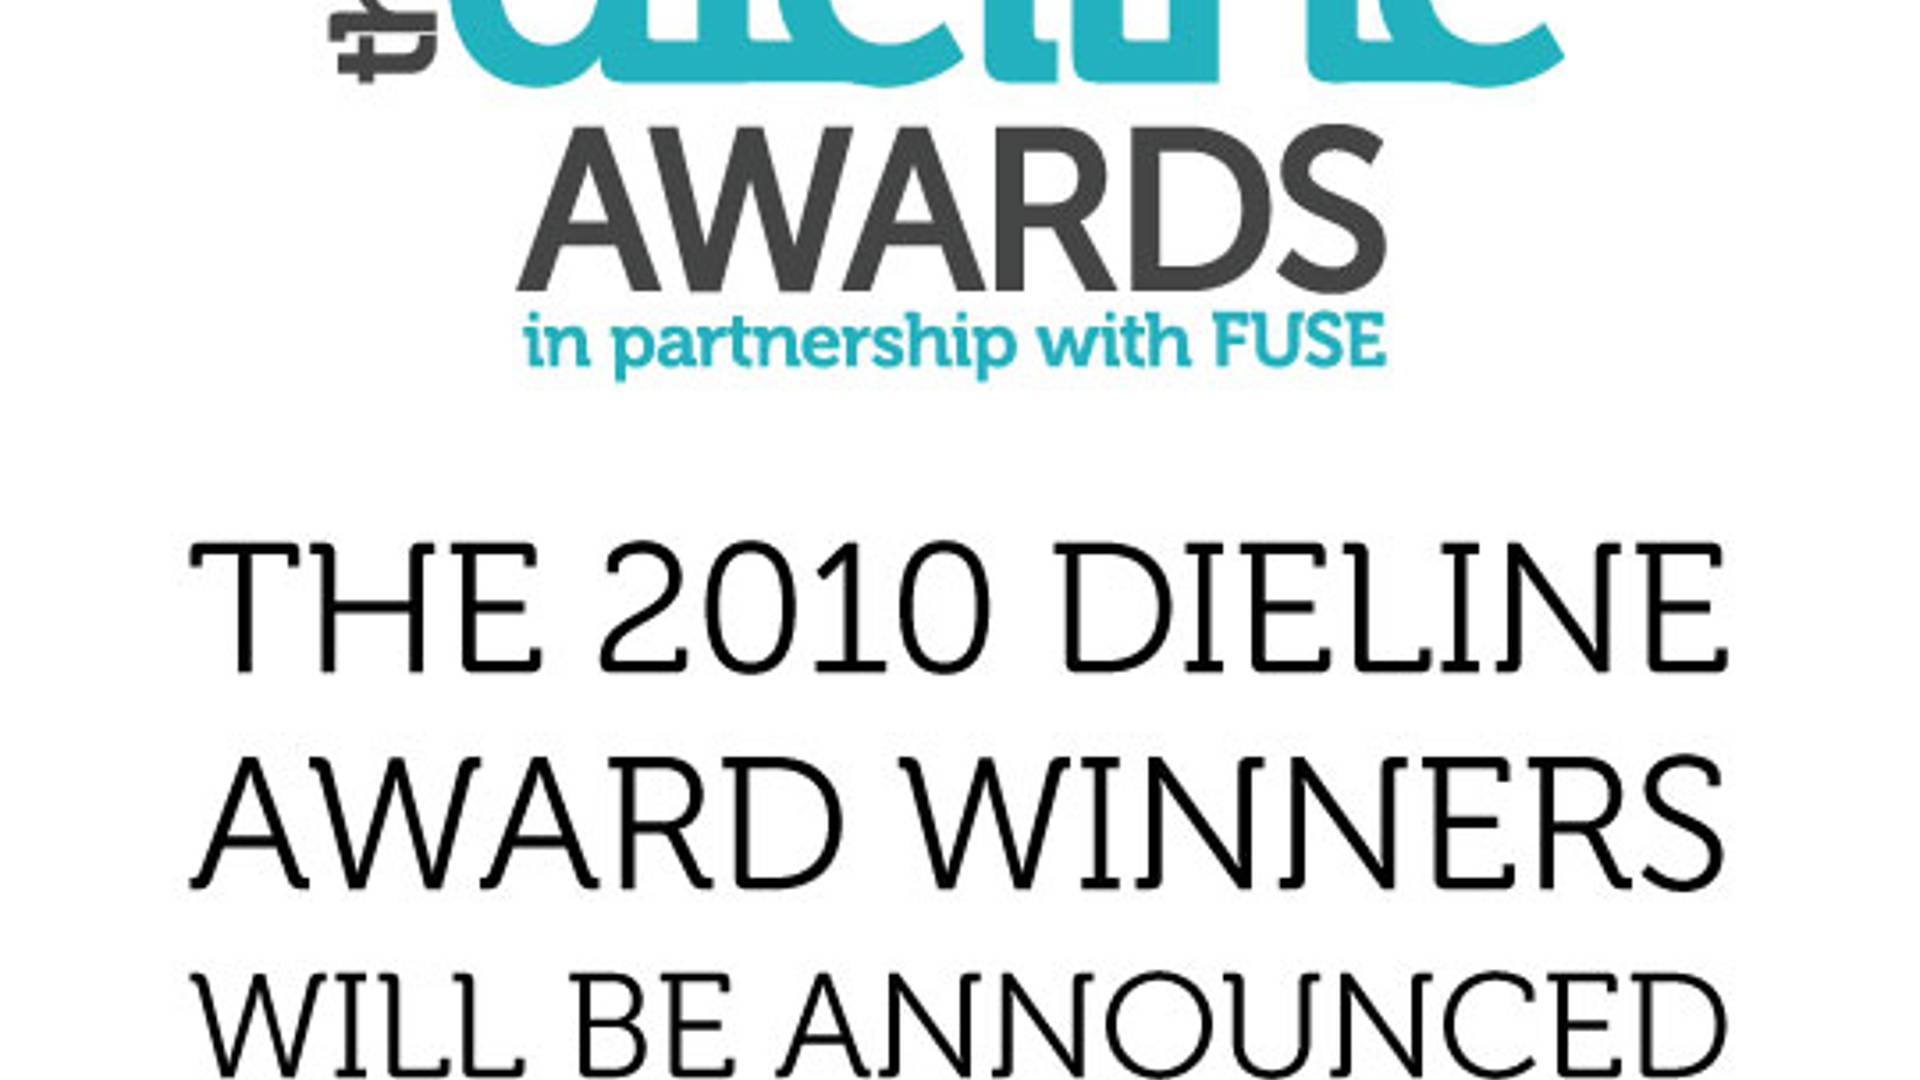 The Dieline Awards will be announced TODAY! Dieline Design